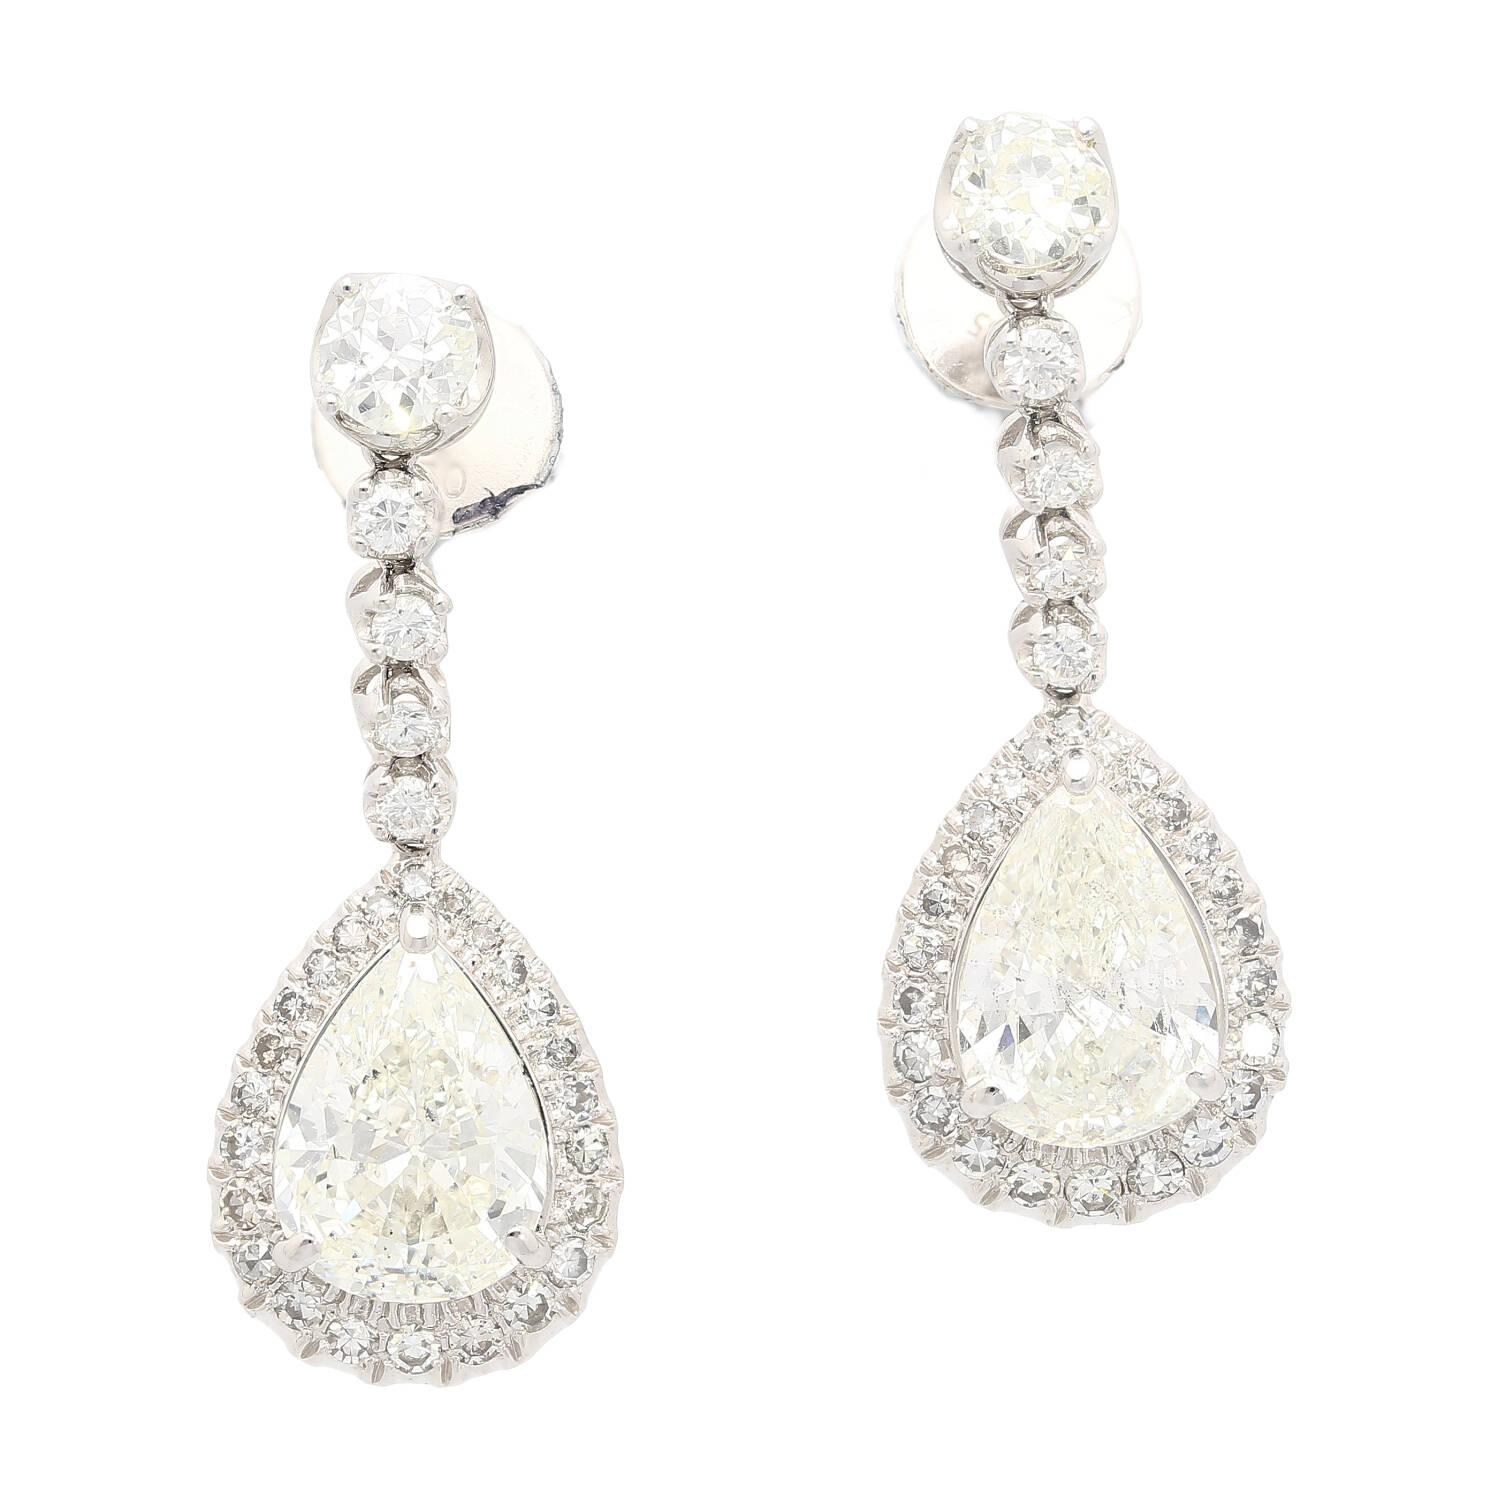 7.5 Carat Gia Certified Pear Cut Natural Diamond Drop Earrings in 18k White Gold In New Condition For Sale In Miami, FL